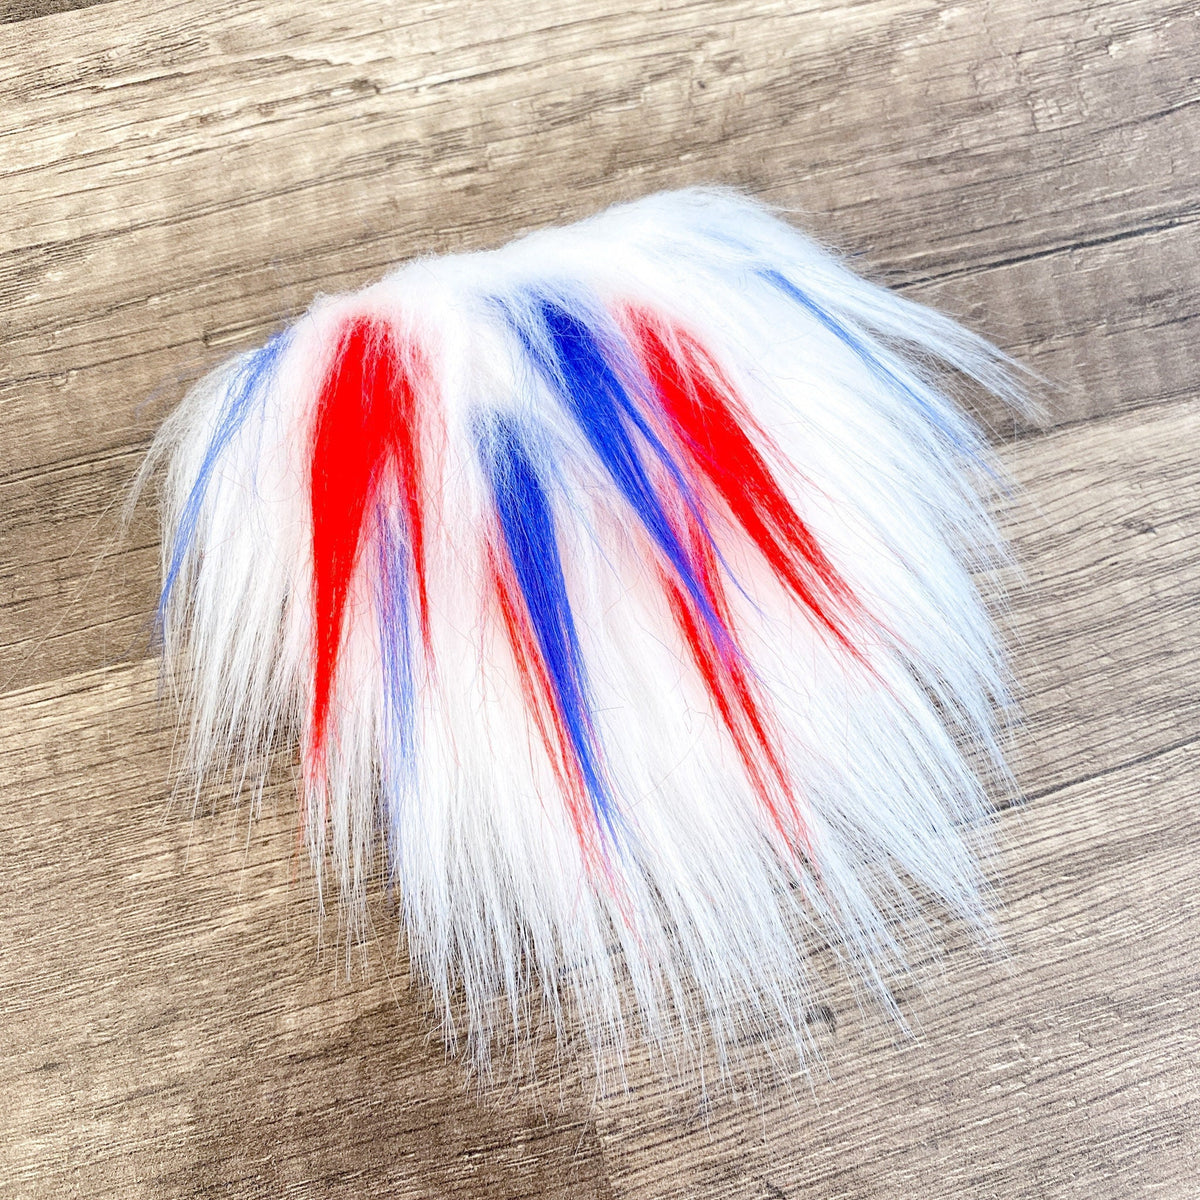 Two Piece Layered Gnome Beard - Patriotic Spike Over Straight White